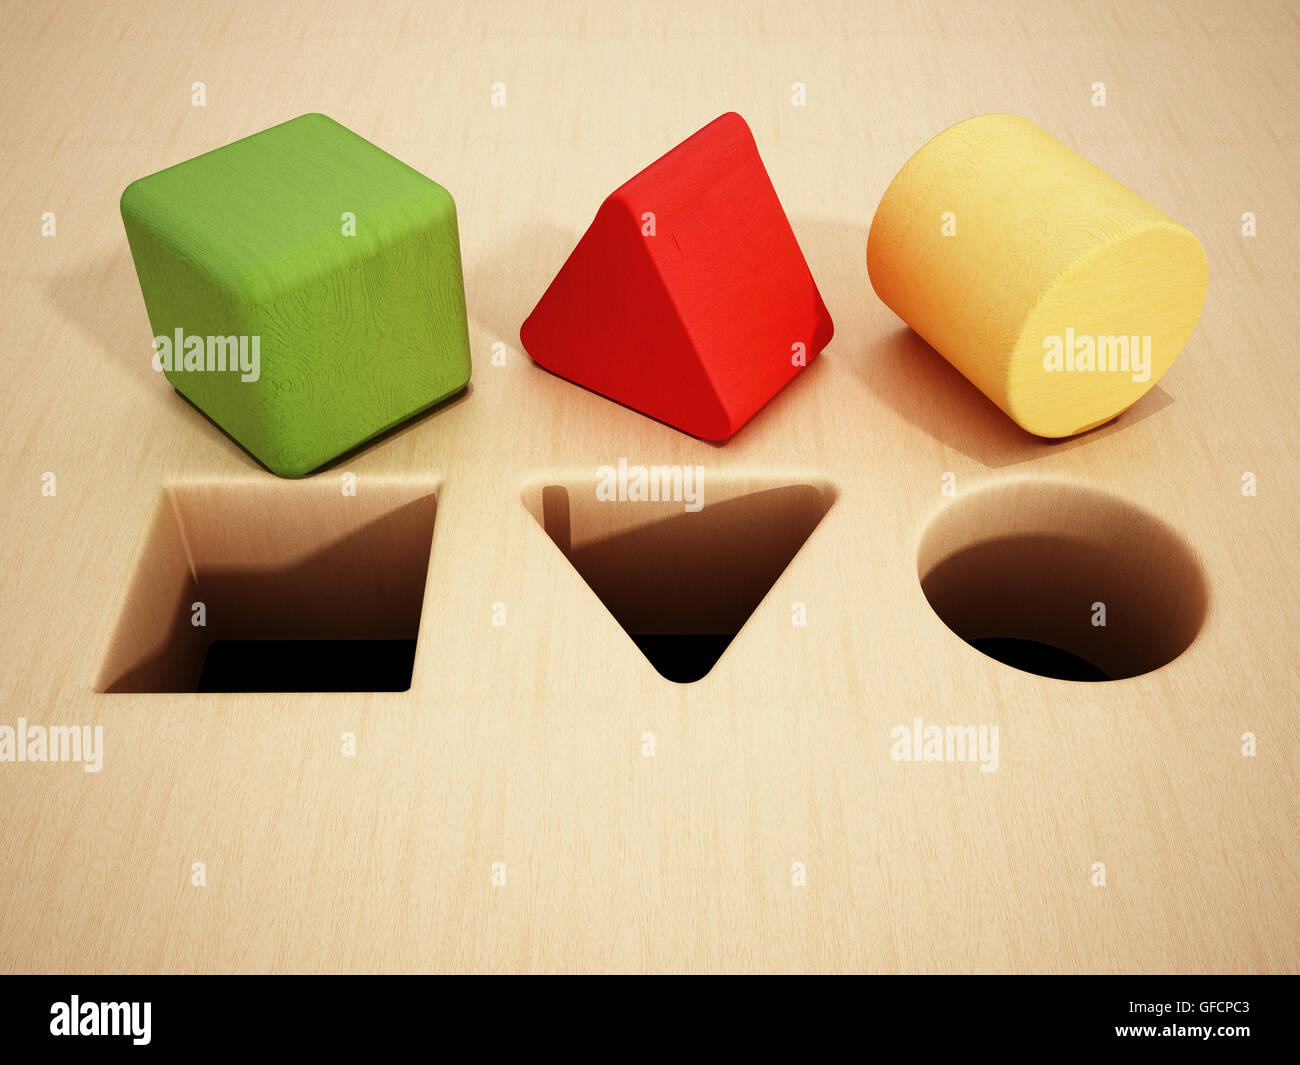 cube-prism-and-cylinder-wooden-blocks-in-front-of-holes-3d-illustration-GFCPC3.jpg